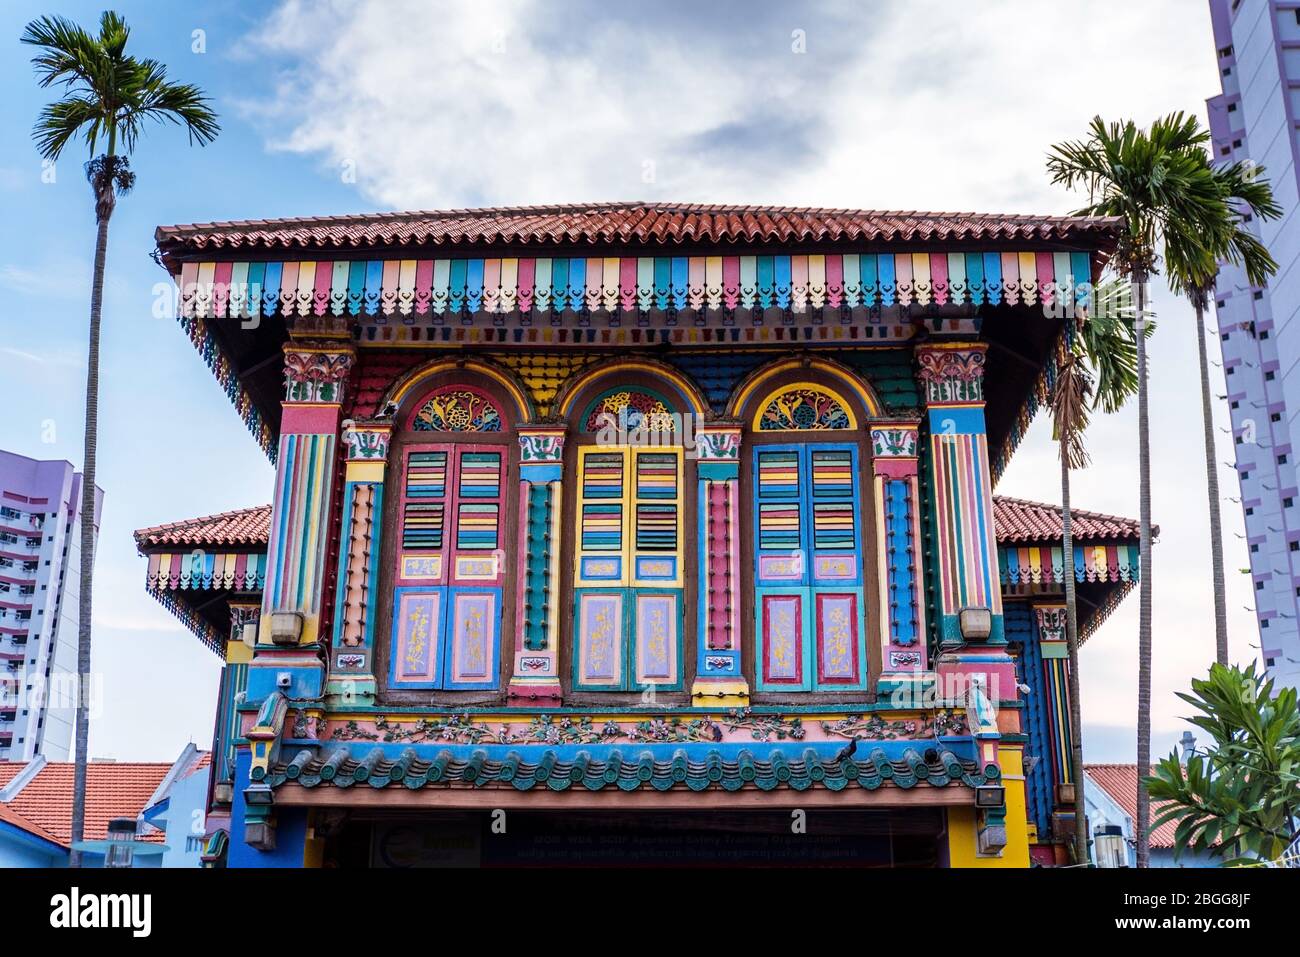 Singapore, Oct 2019: Colorful House of Tan Teng Niah against blue sky. Popular tourist spot in Little India district. 37 Kerbau Road Stock Photo